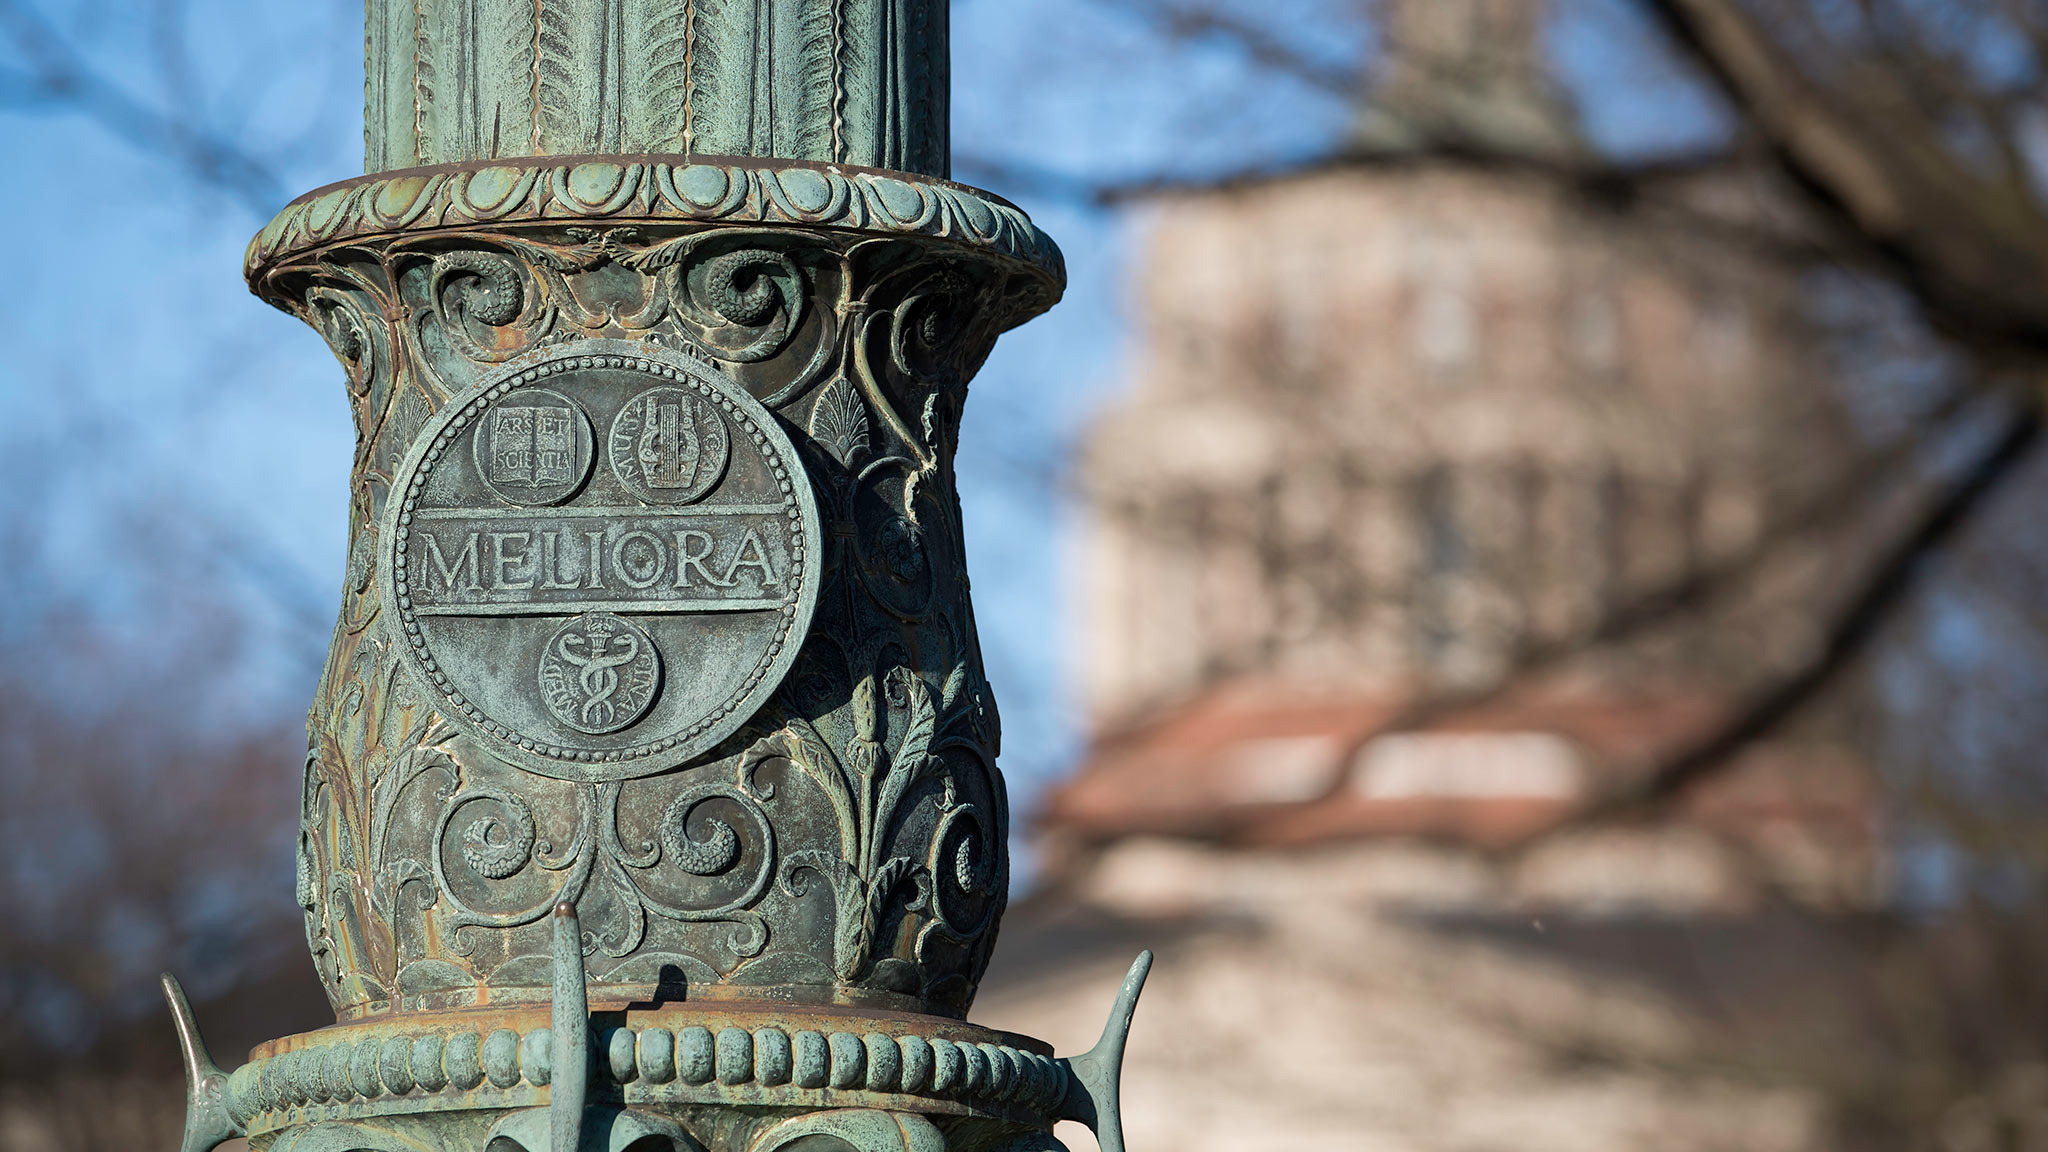 A close up of a Meliora flagpole with the tower of Rush Rhees library in the background.